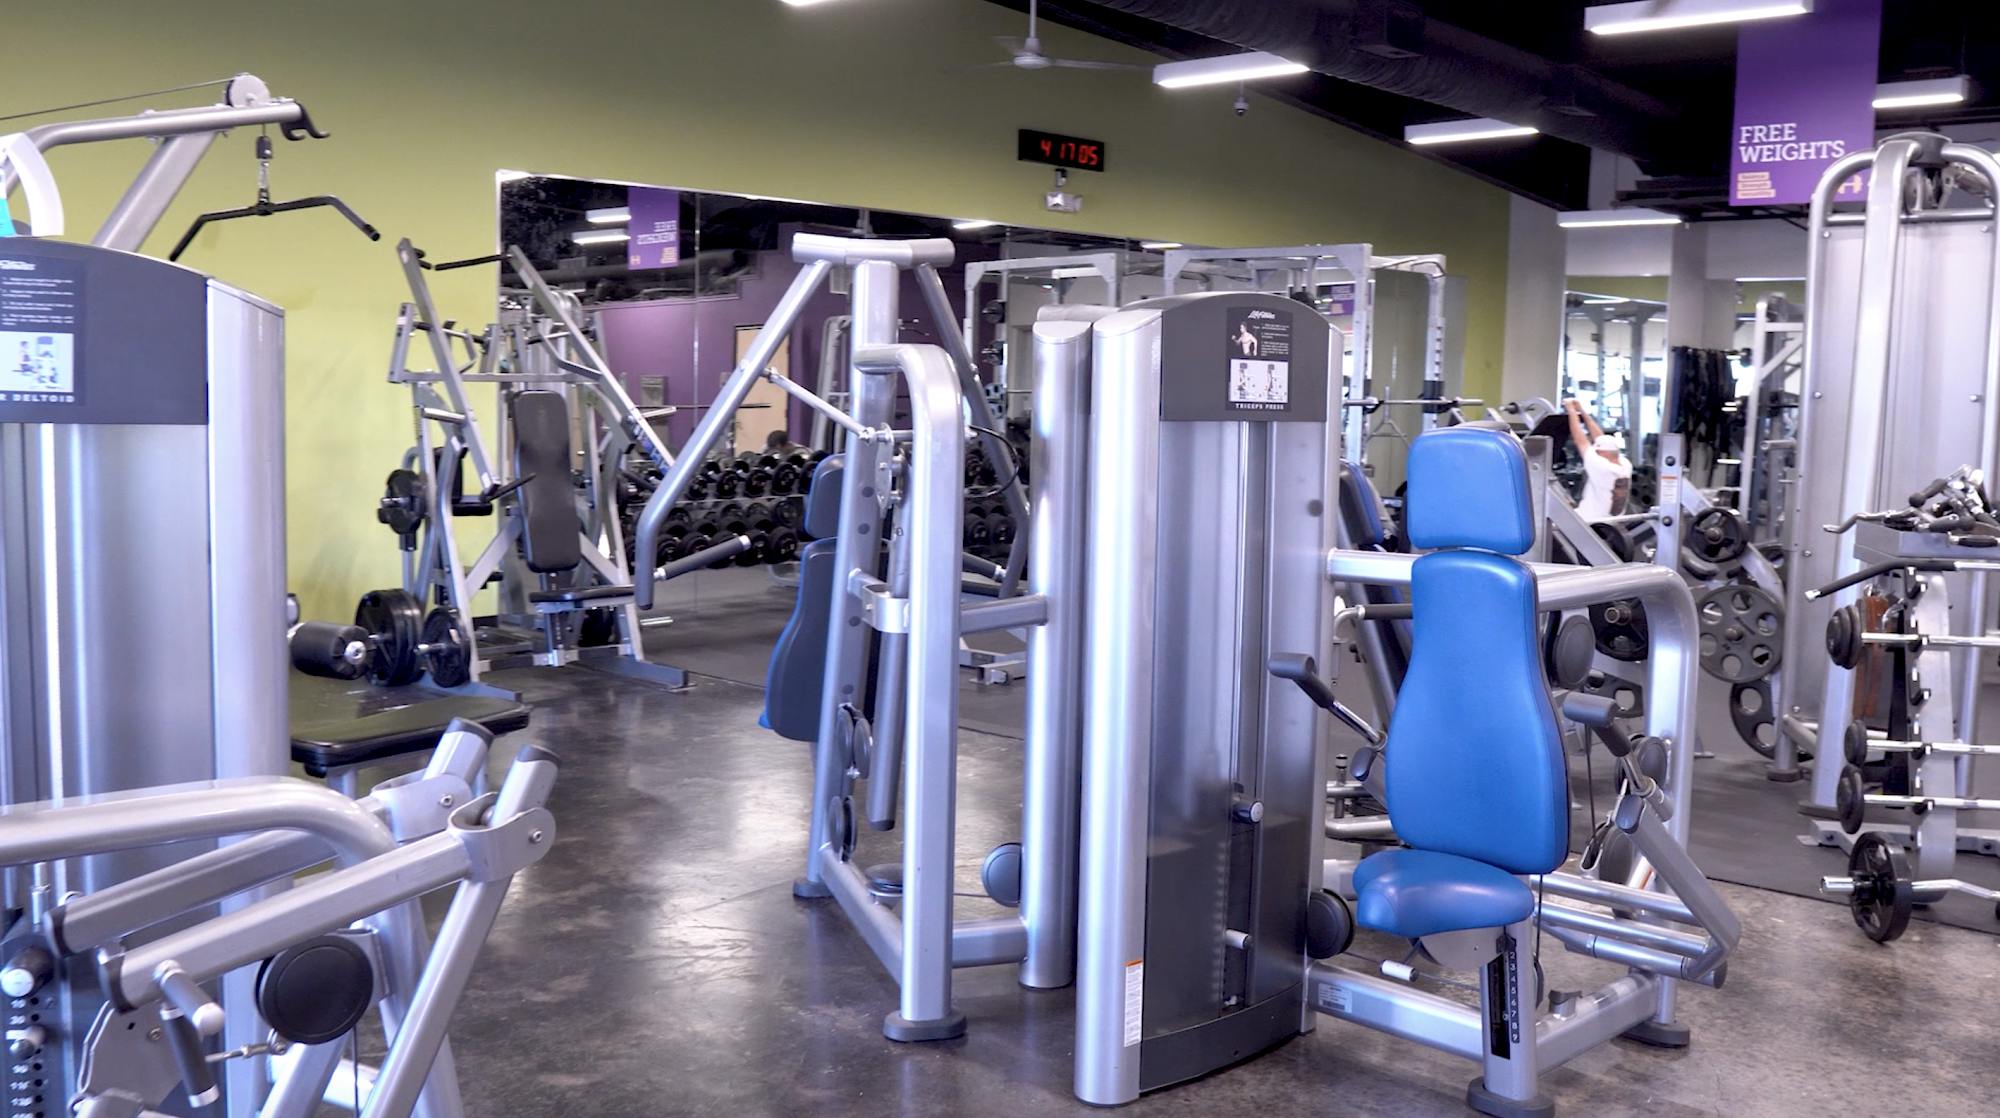 Anytime Fitness New Braunfels